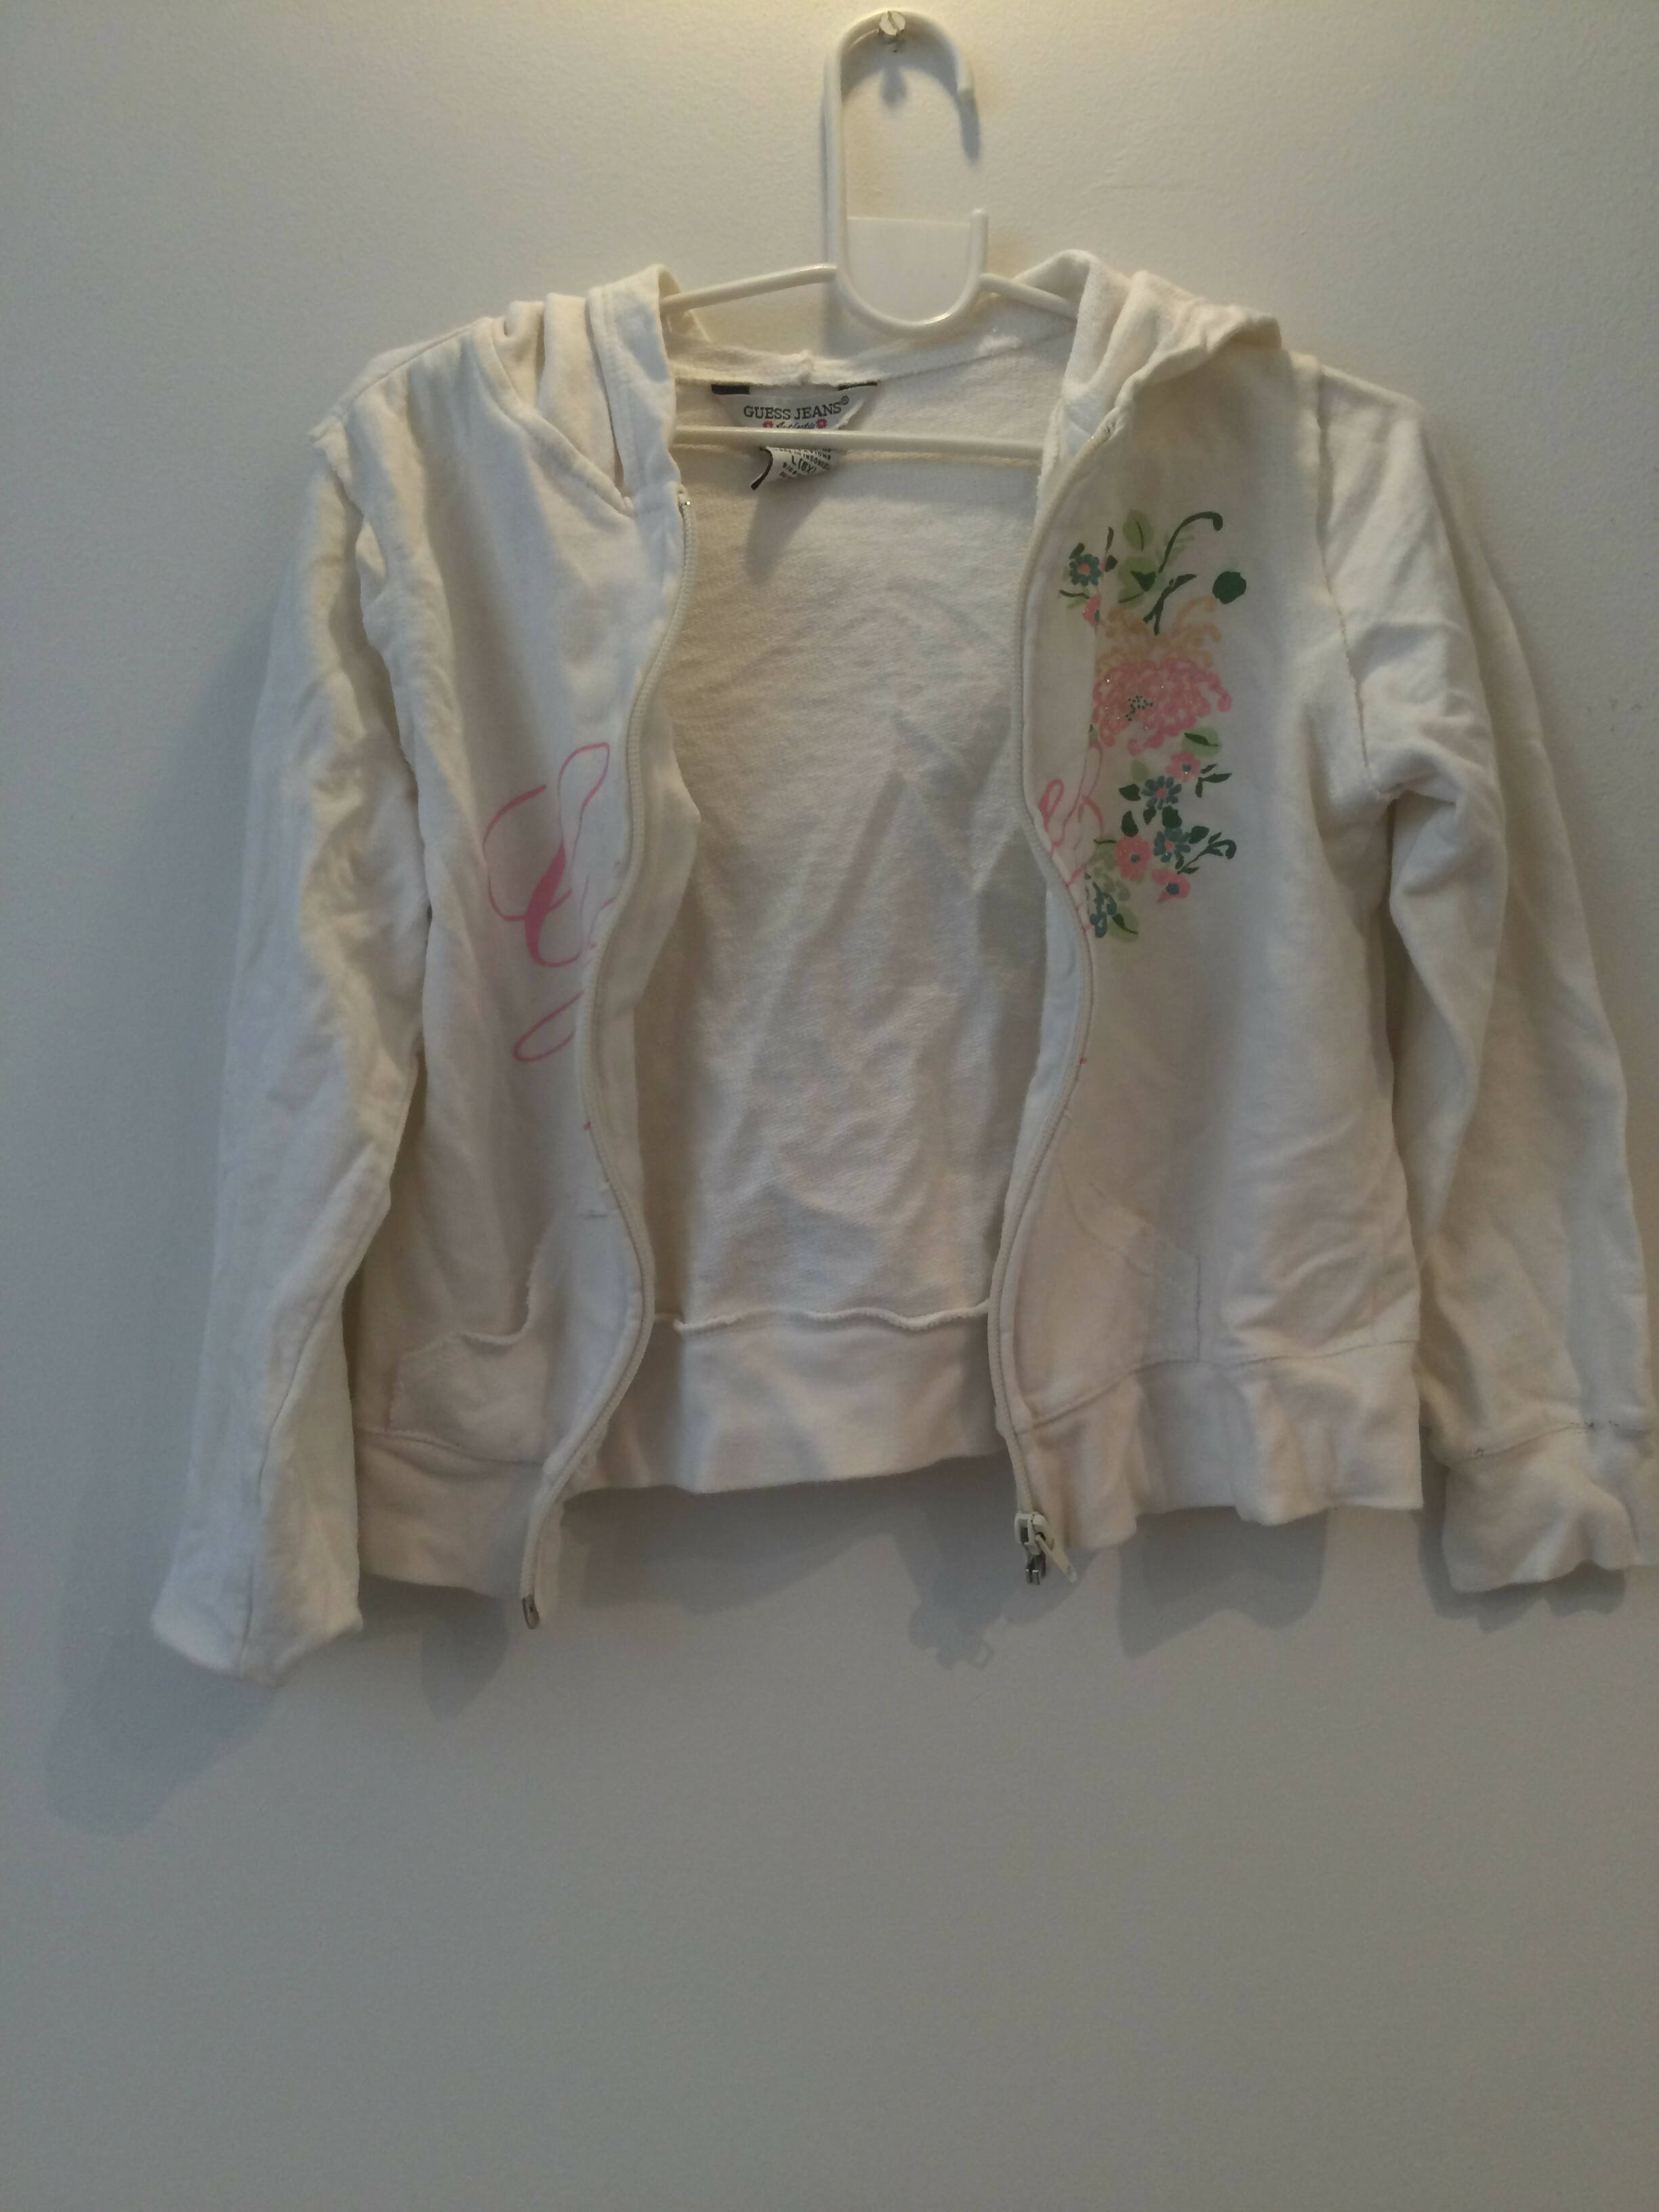 Guess | Kids hoodie white (size 6) | Girls Tops & Shirts | Worn Once